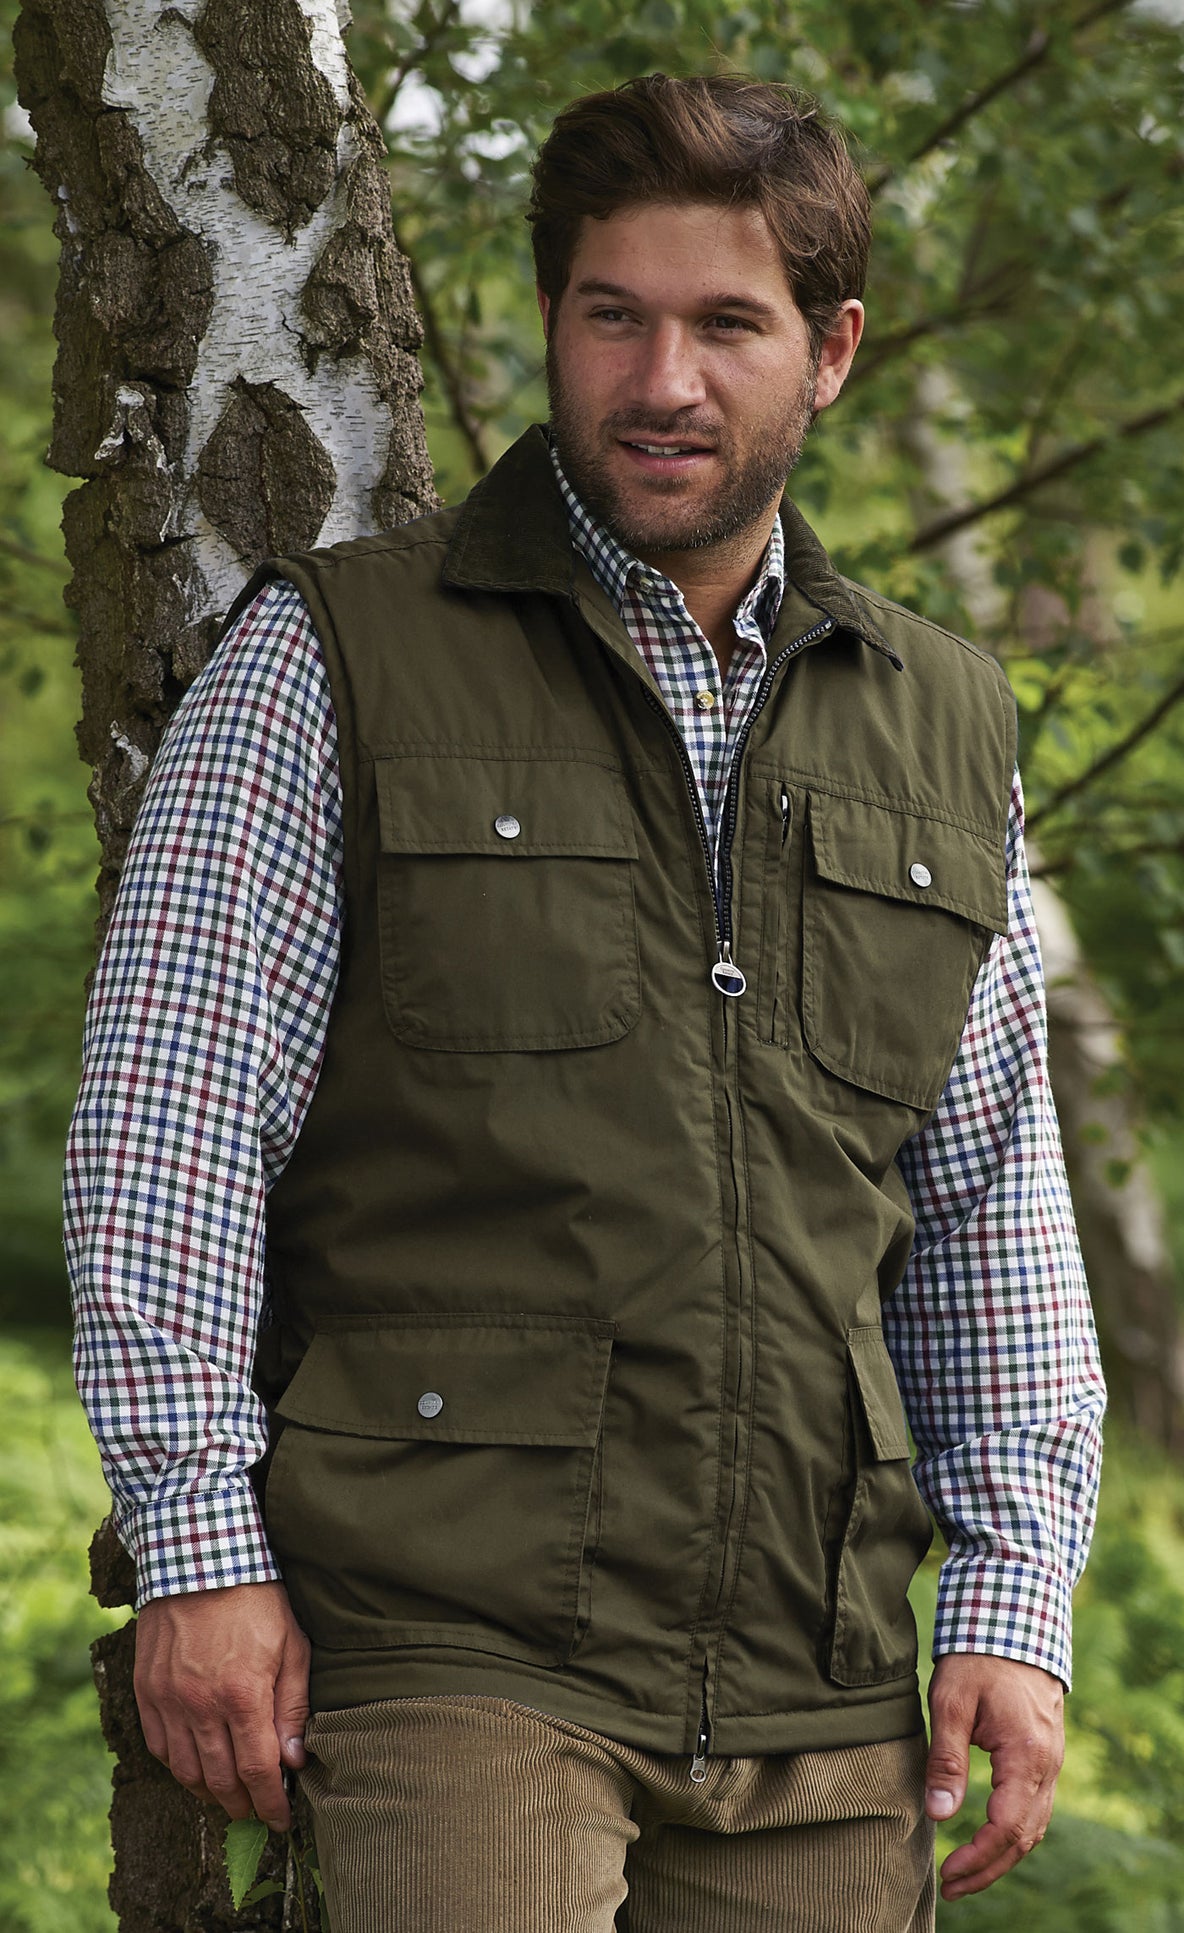 Silverdale Multi Pocket Waistcoat from Champion Outdoor in olive